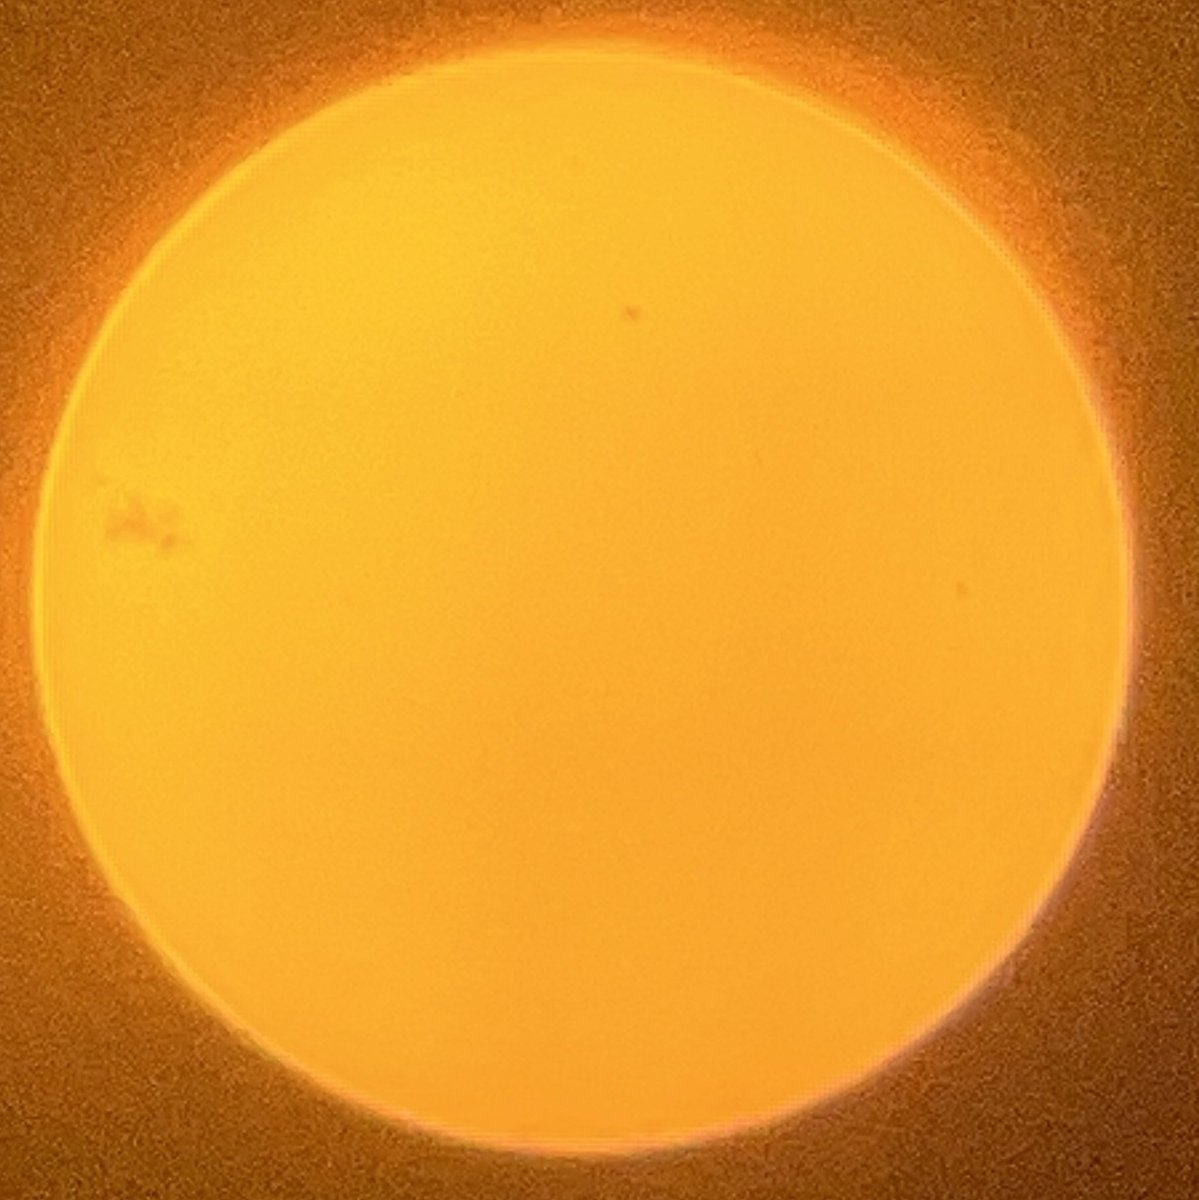 Adventures In Astronomy: A Peek At The Sun! I took out my telescope and solar filter to check out the sun. This is sun spot AR3664 and the cause of the recent aurora borealis sightings everywhere. It is larger than 15 Earths across! #FearlessAstronomy #ScienceIsFun #STEAM